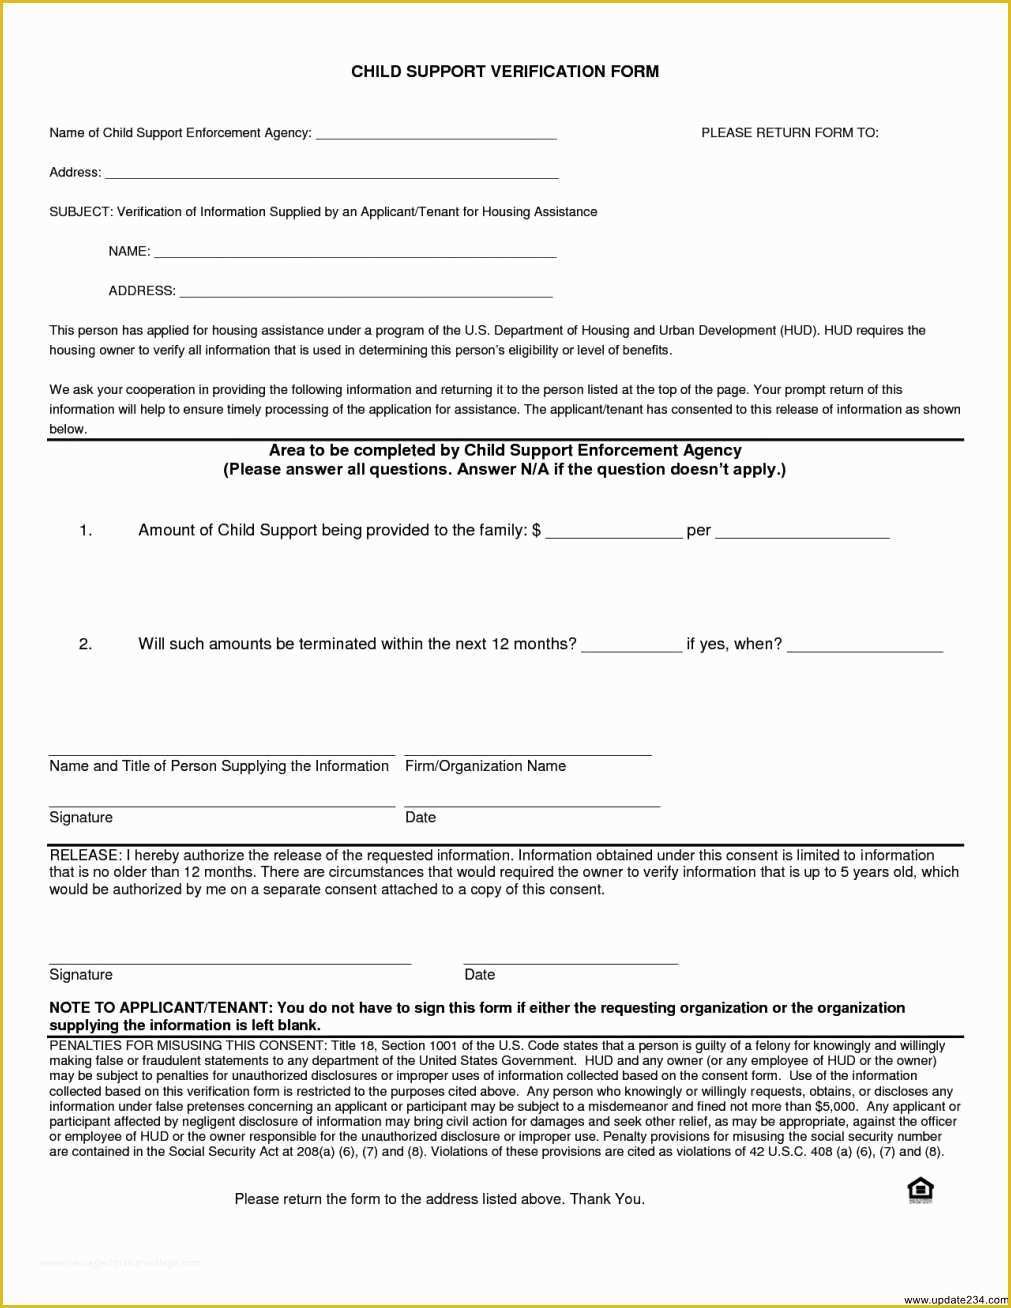 Free Template for Child Support Agreement Of Voluntary Custody Agreement form Fast Voluntary Child